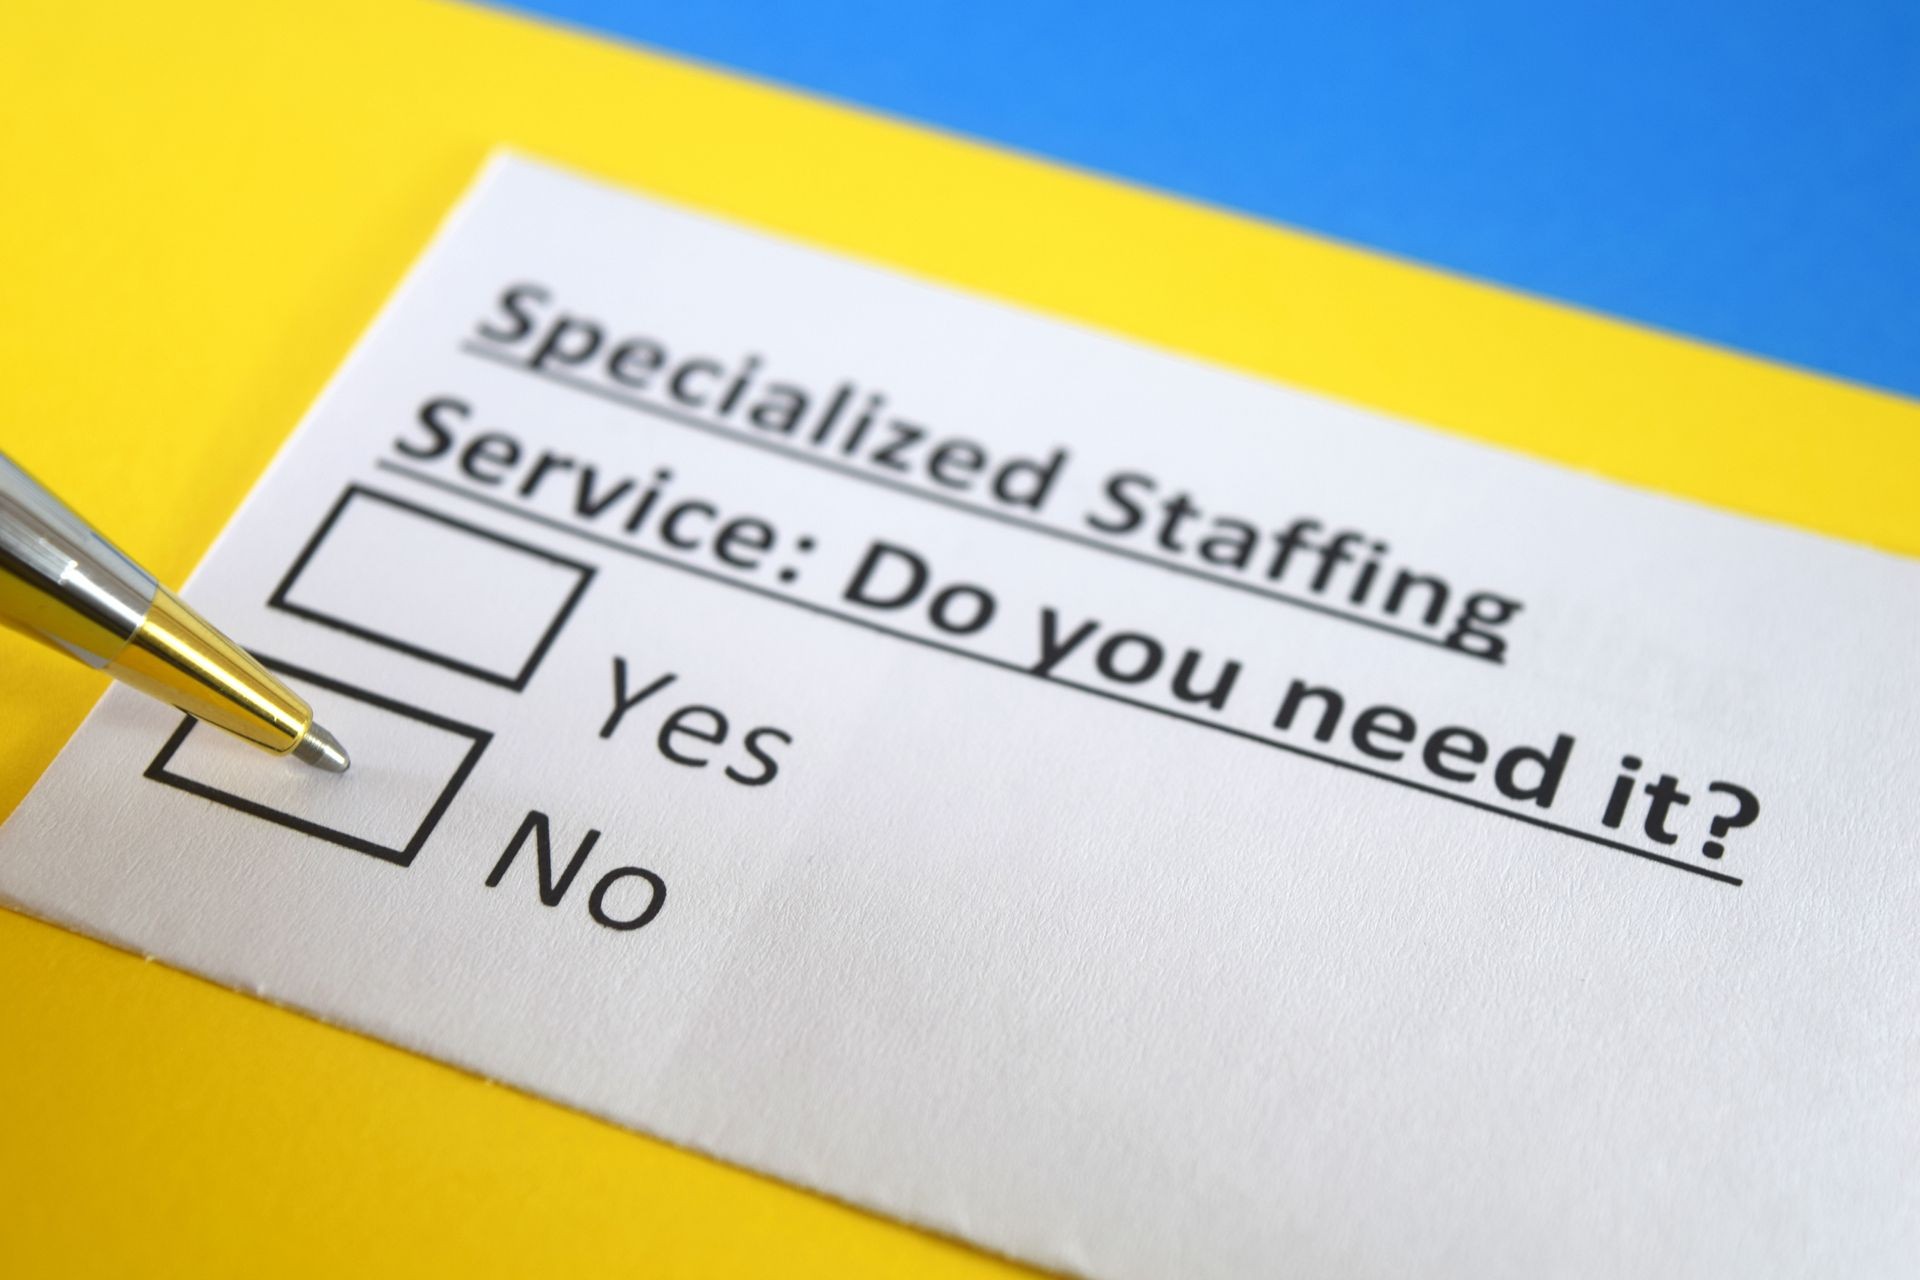 Specialized staffing service : Do you need it? yes or no